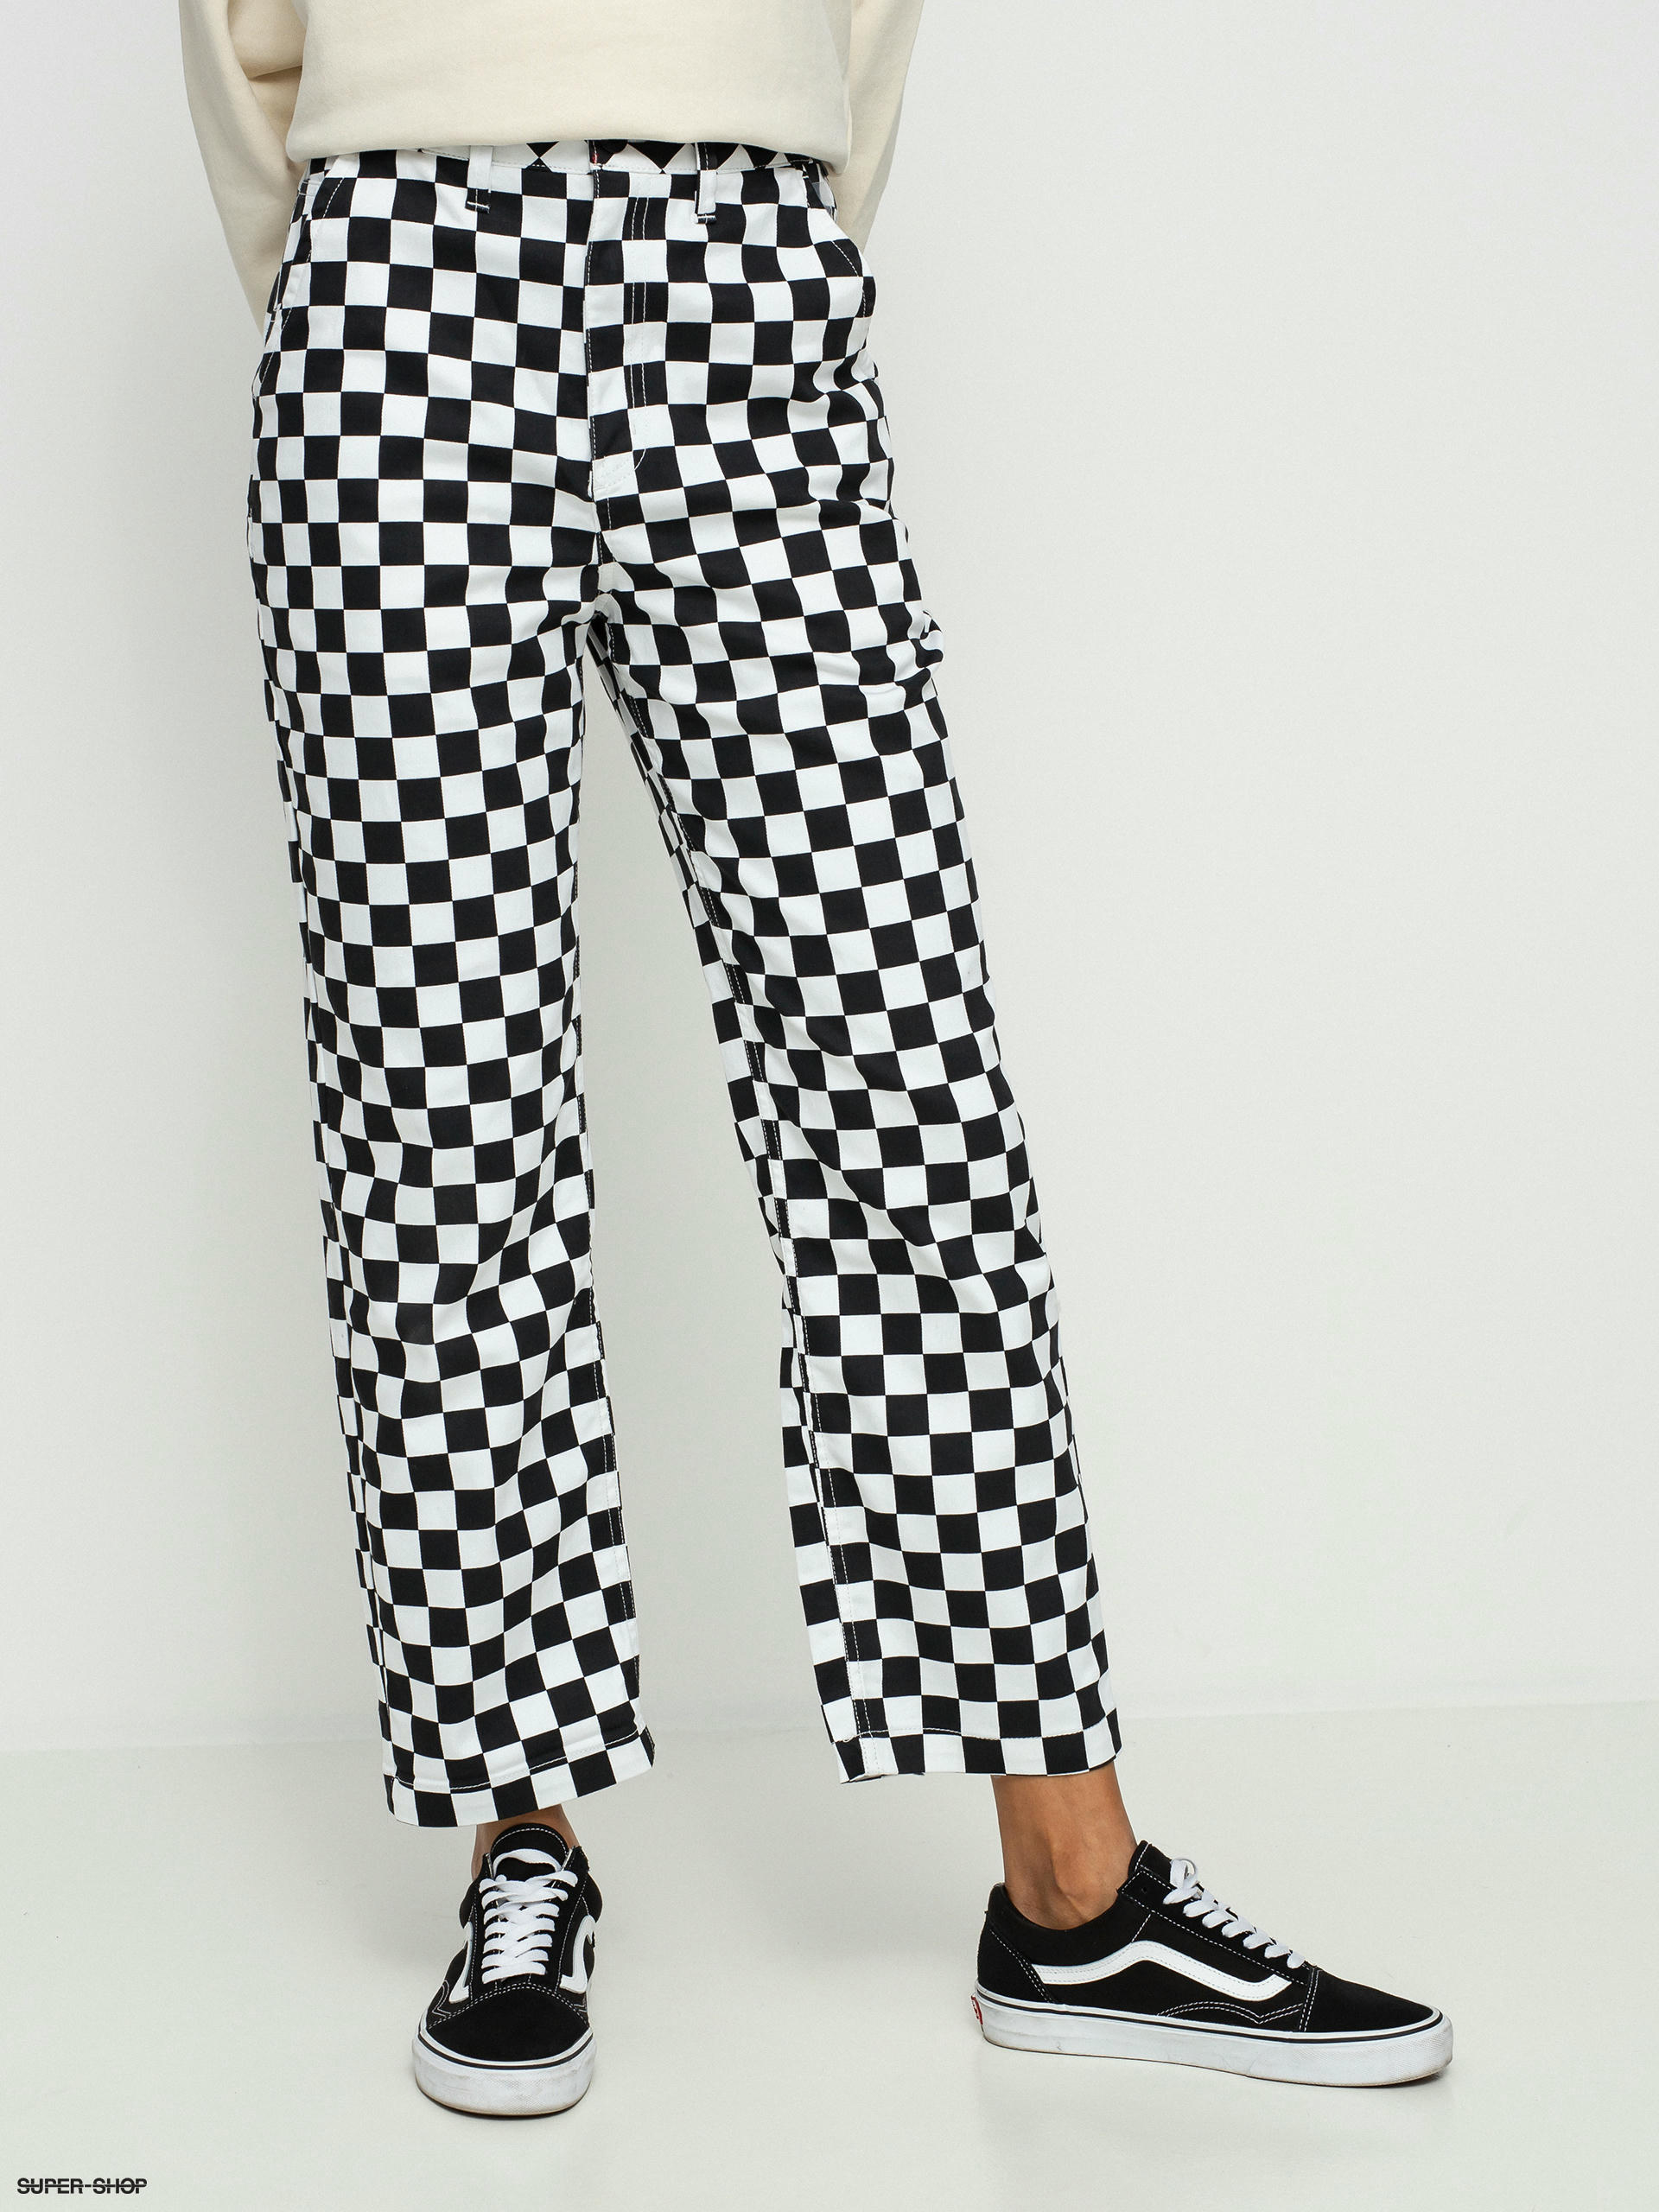 VANS Authentic Chino Checkered Womens Wide Leg Pants - BLACK/WHITE | Tillys